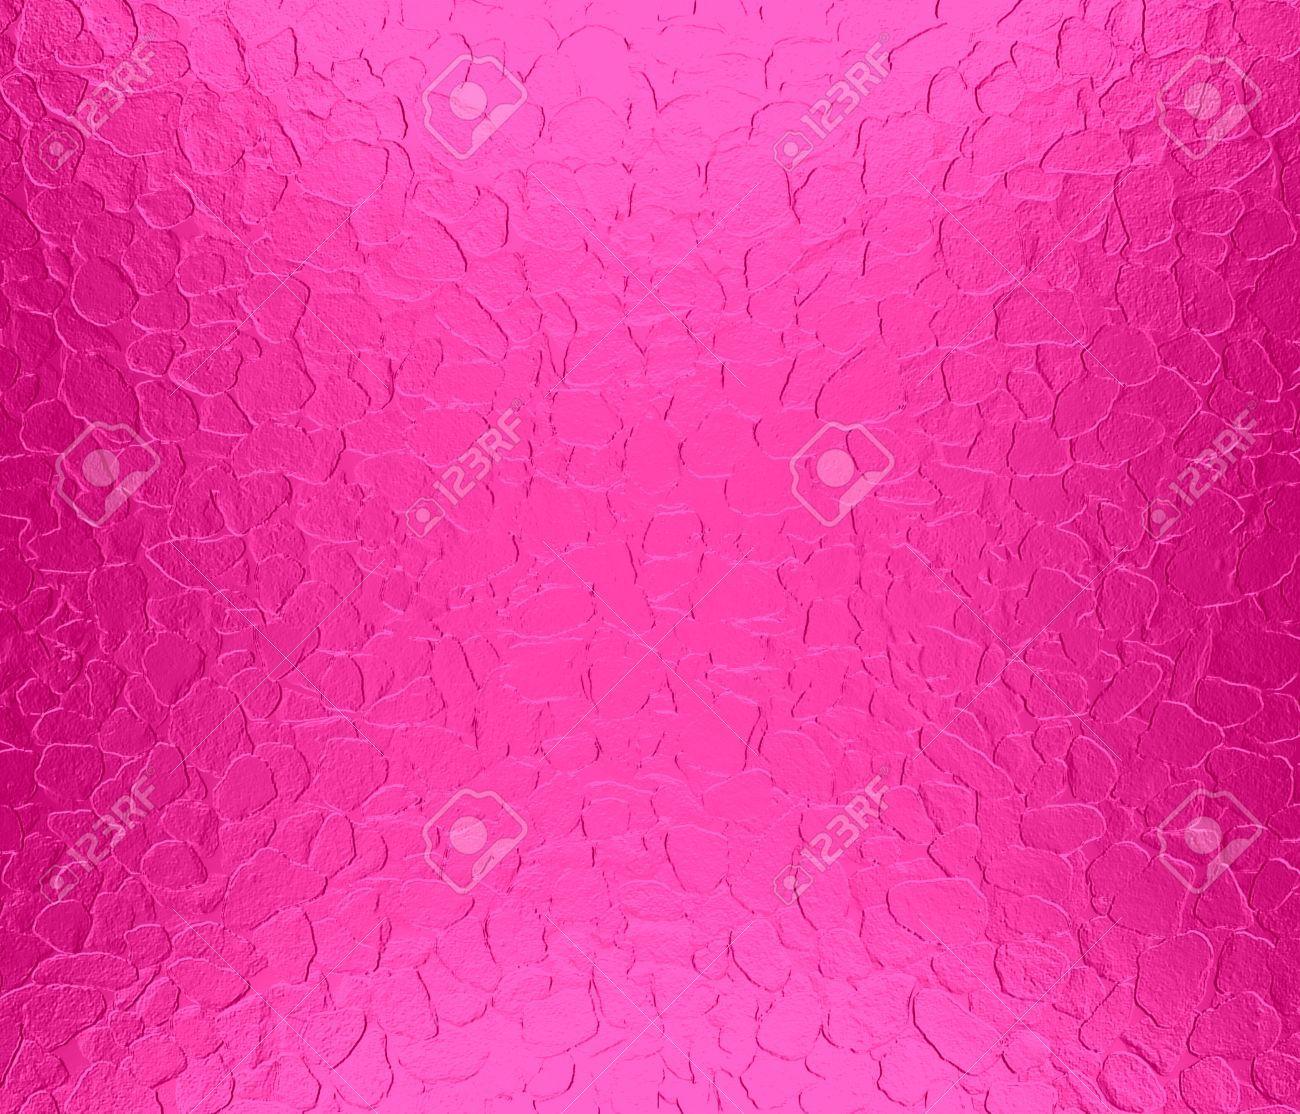 barbie pink background 10. Background Check All